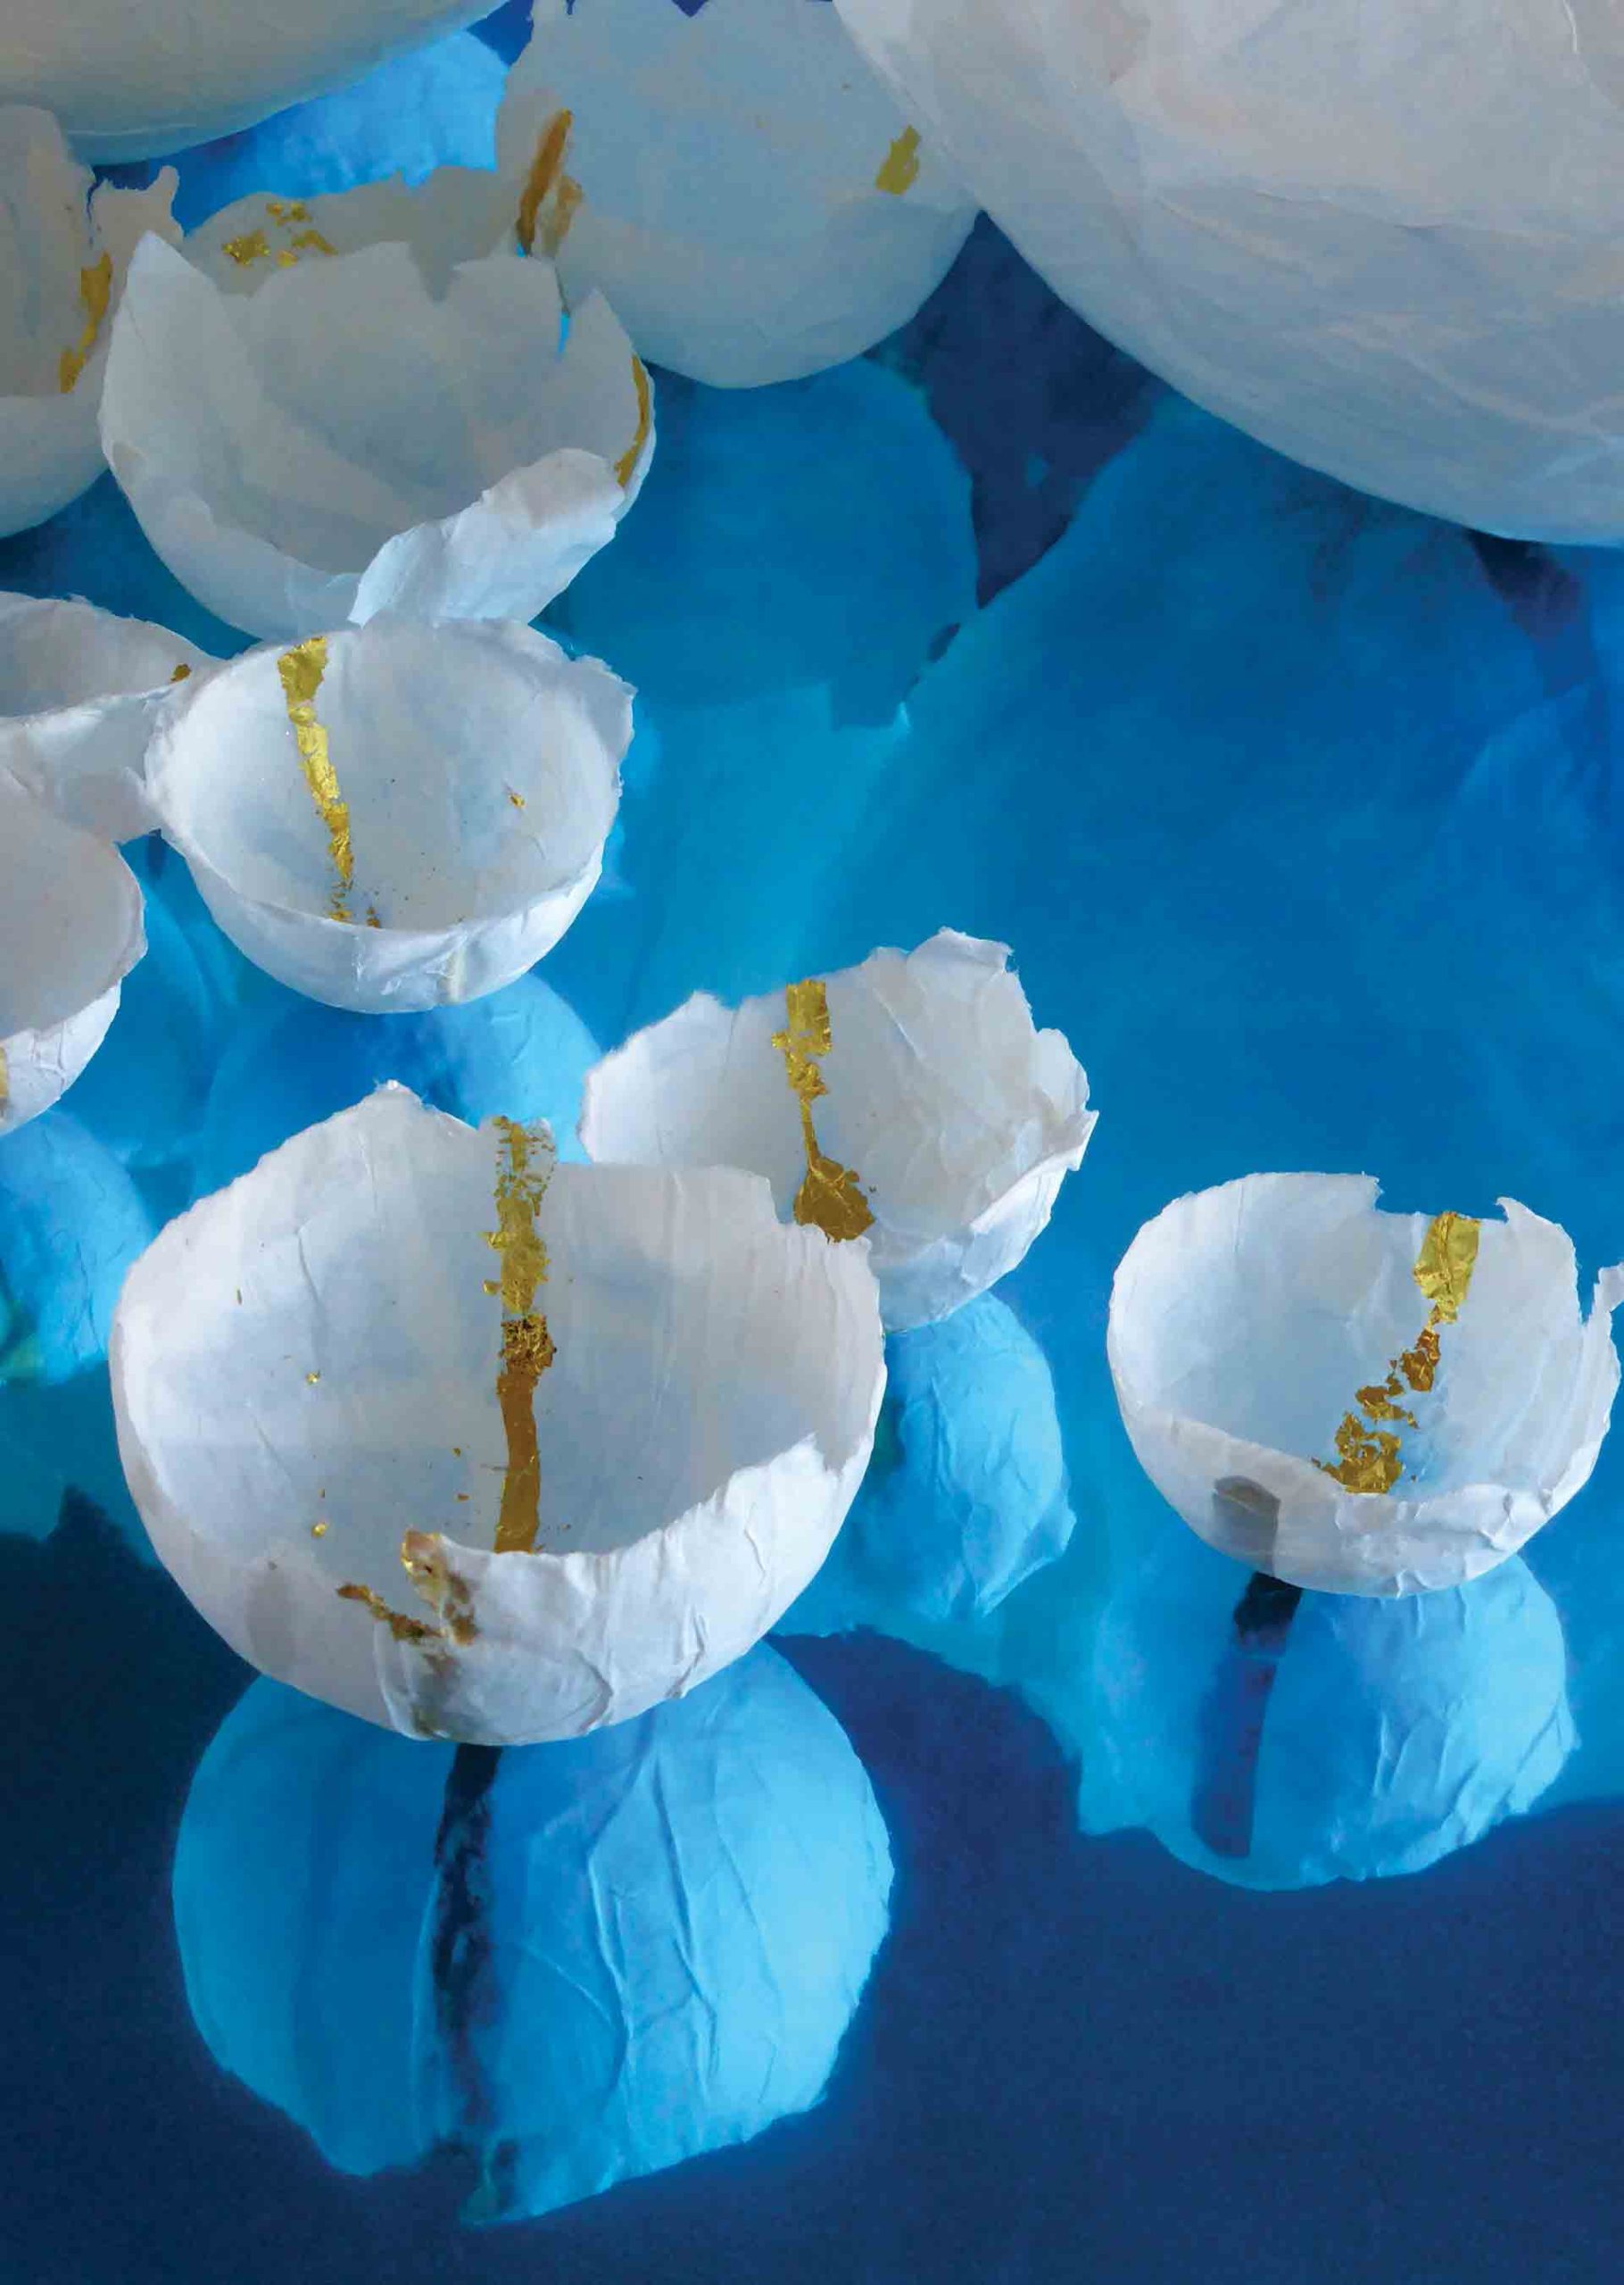 White bowls made of rice paper mâché and 23 Carat gold leaf reflected on a bright blue surface. This is part of the Homage process, a self-care practice created by Marie Barincou for nurses and oncology staff to address the loss of their patients.